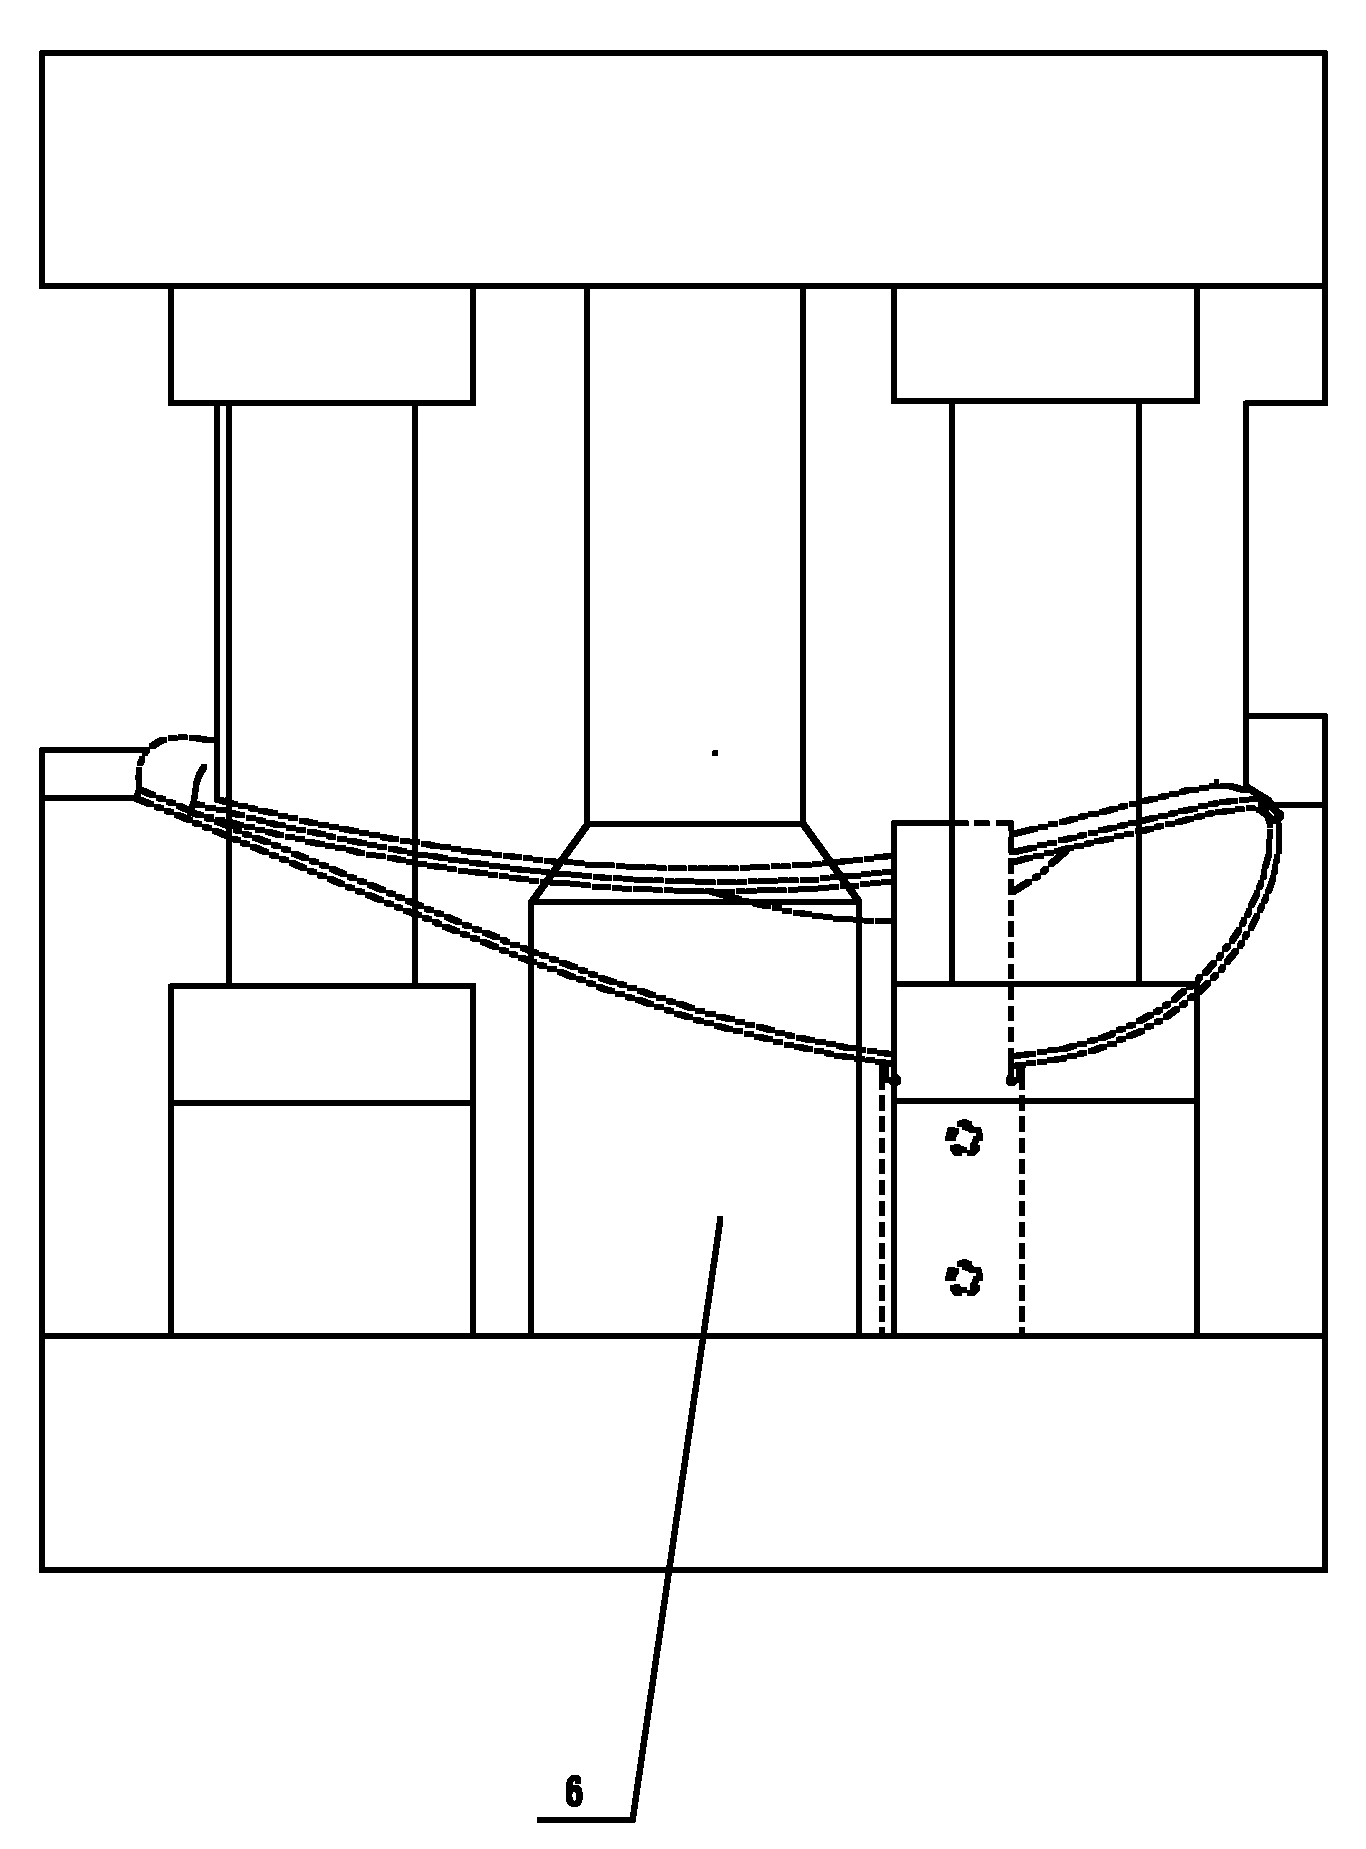 Hollow partition plate stationary blade profile correcting method